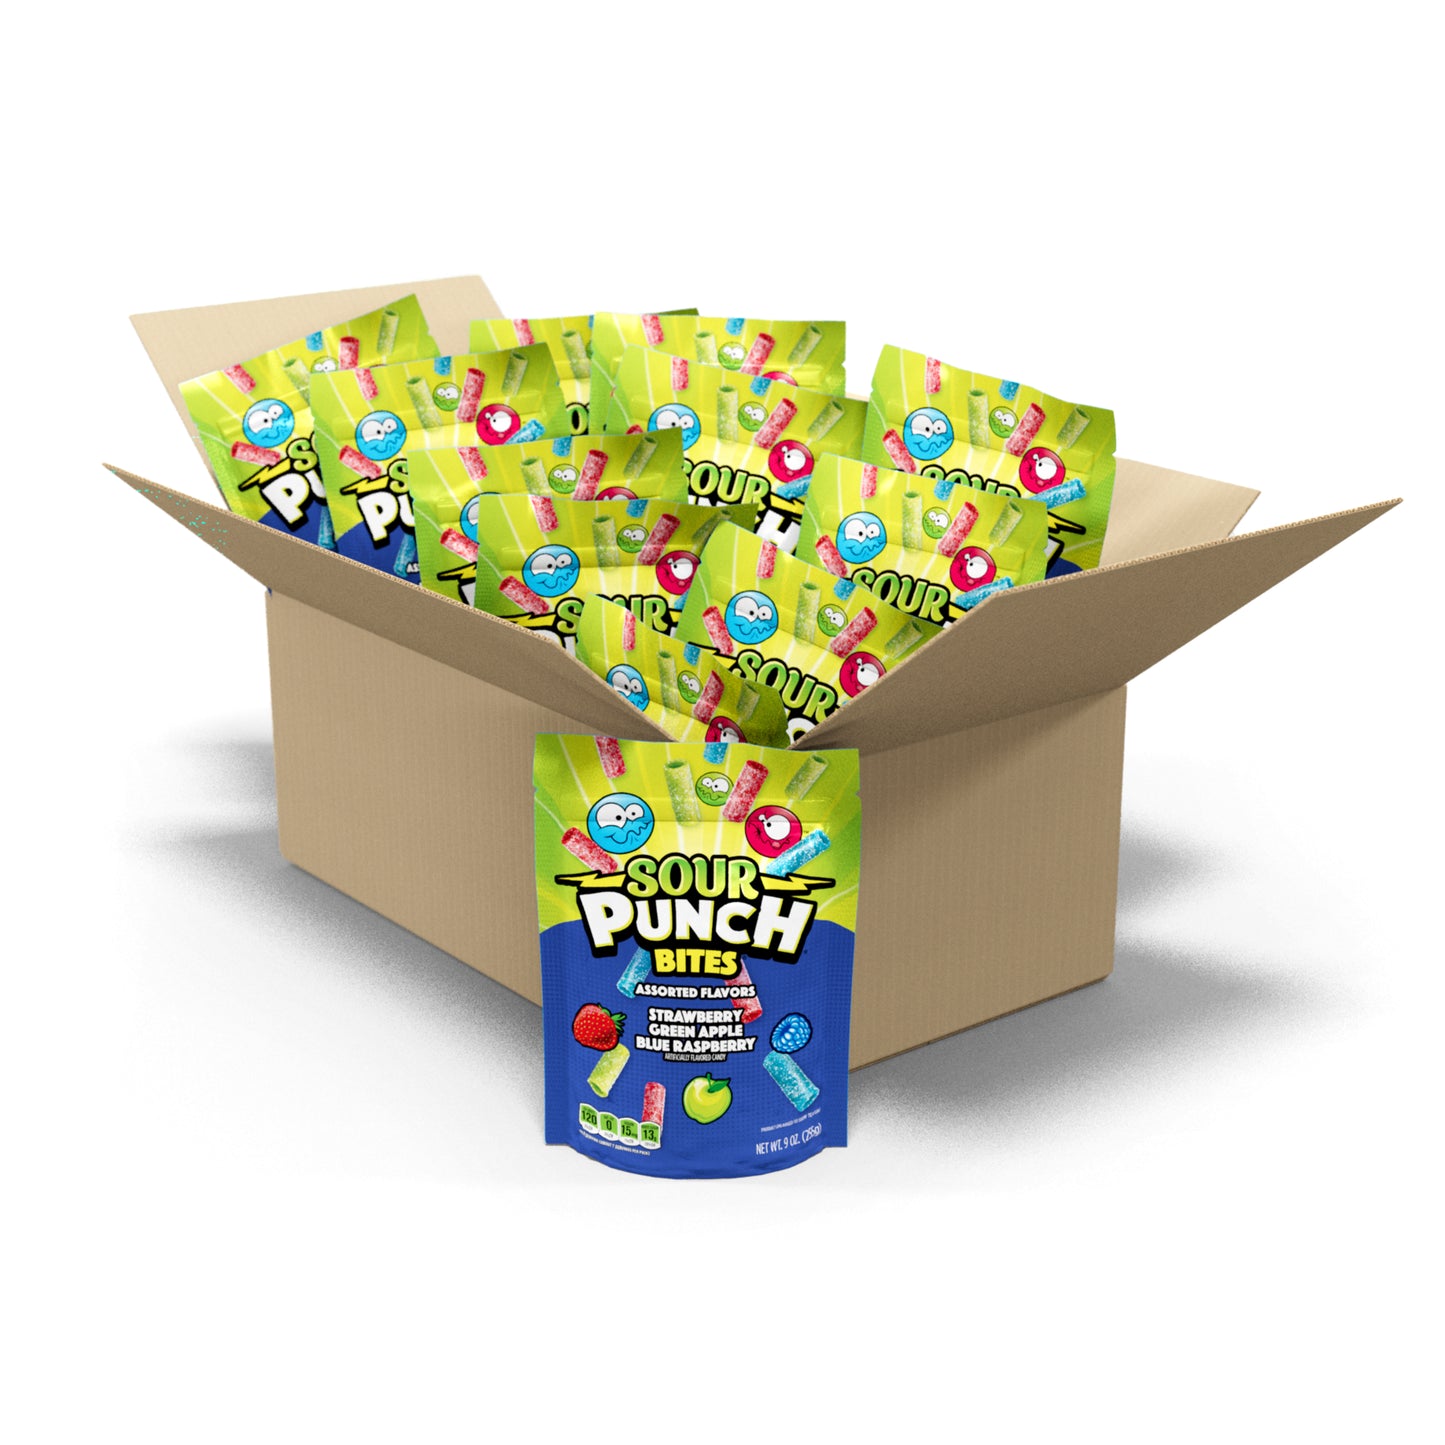 SOUR PUNCH Assorted Candy Bites, Assorted Sour Candy, 12 Pack of 9oz Bags